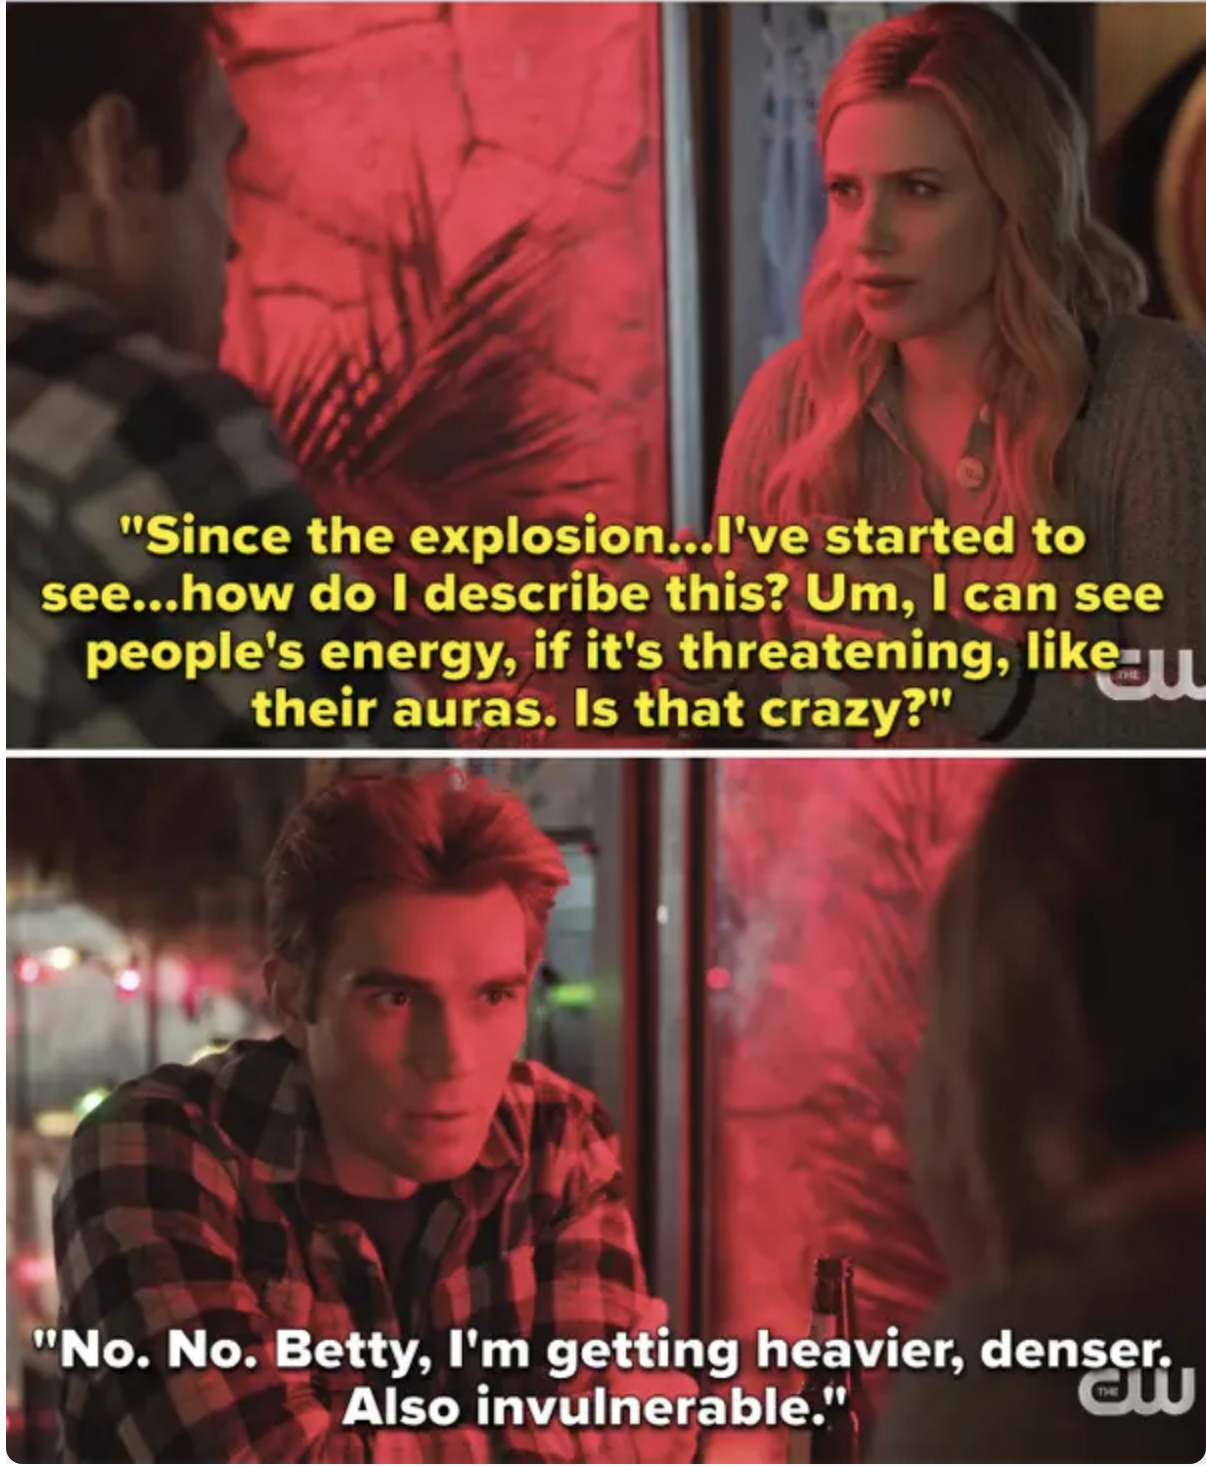 Betty and Archie talking about how they feel after the explosion